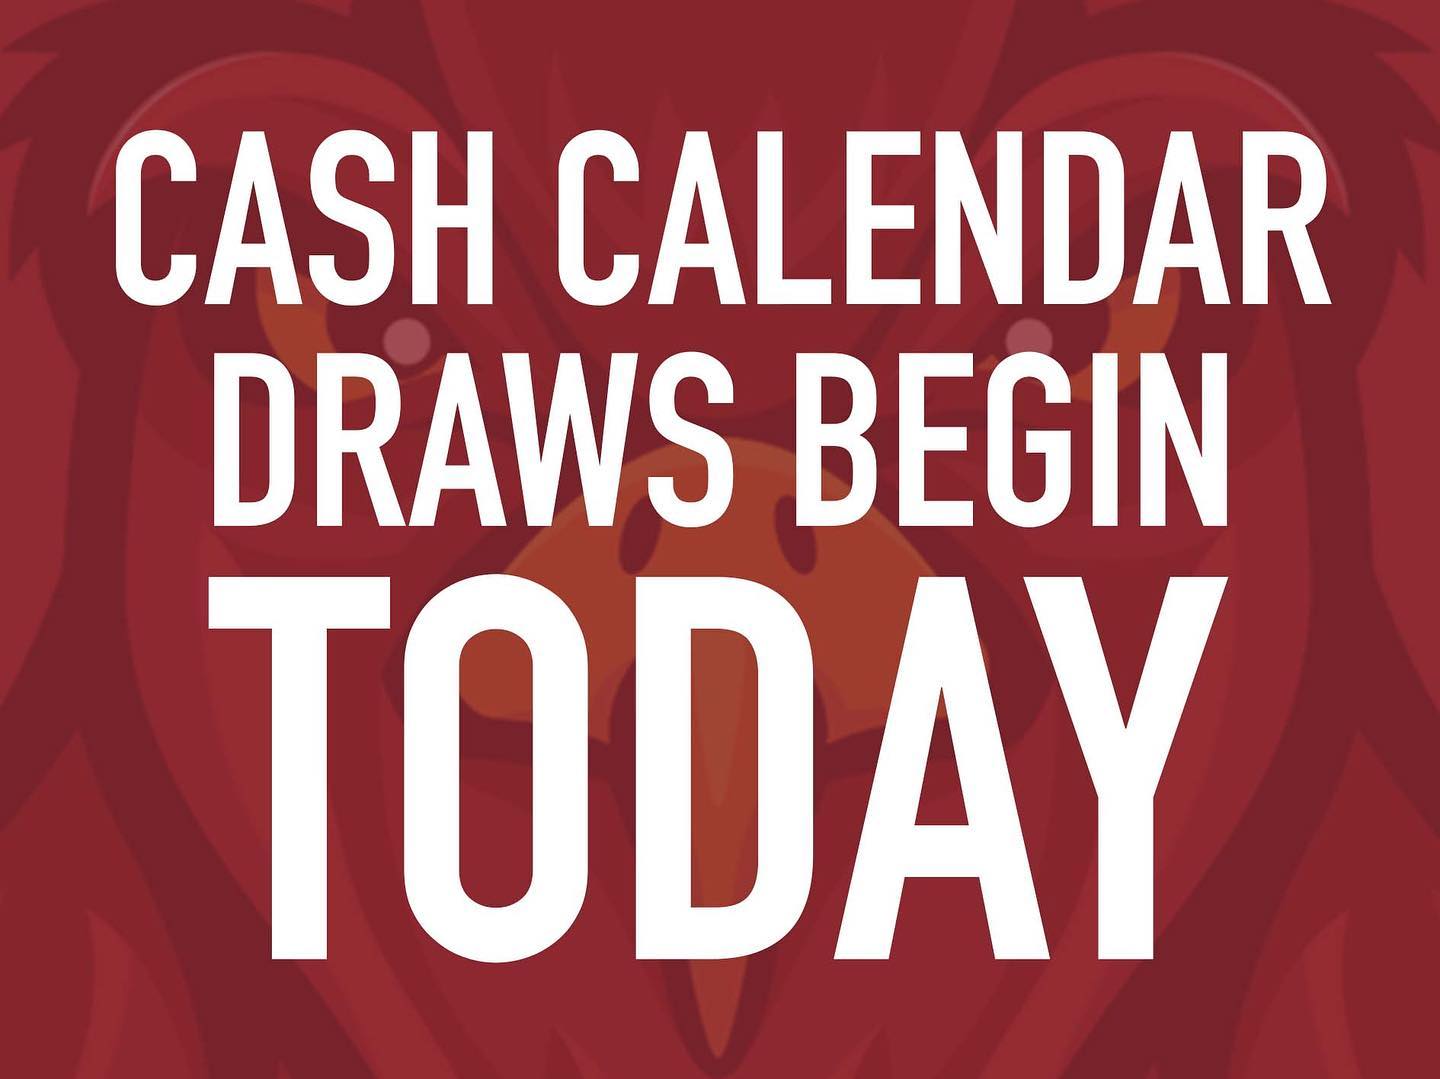 The Cash Calendar draws begin TODAY REDHAWK FANS! 

Our first winner will be announced tonight (would have been in the arena during the game 😩)

Thank you to everyone who supported us and the @rivuletteshockey by buying a cash calendar. Good luck to everyone 💵